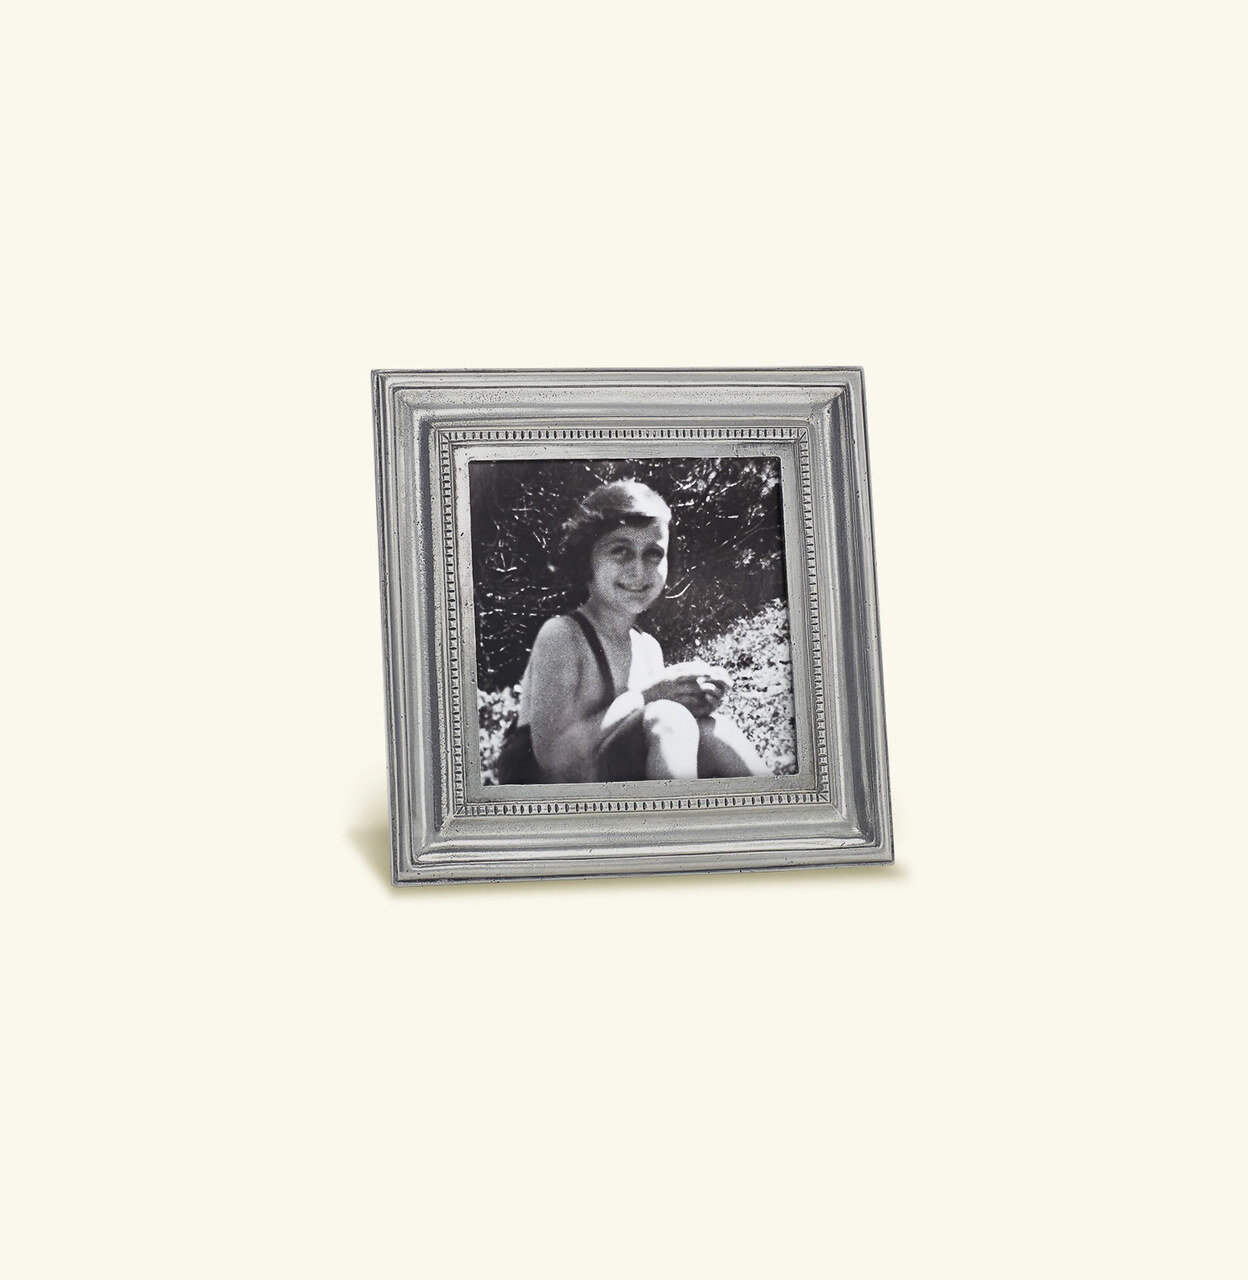 Match Pewter Toscana Square Picture Frame Medium